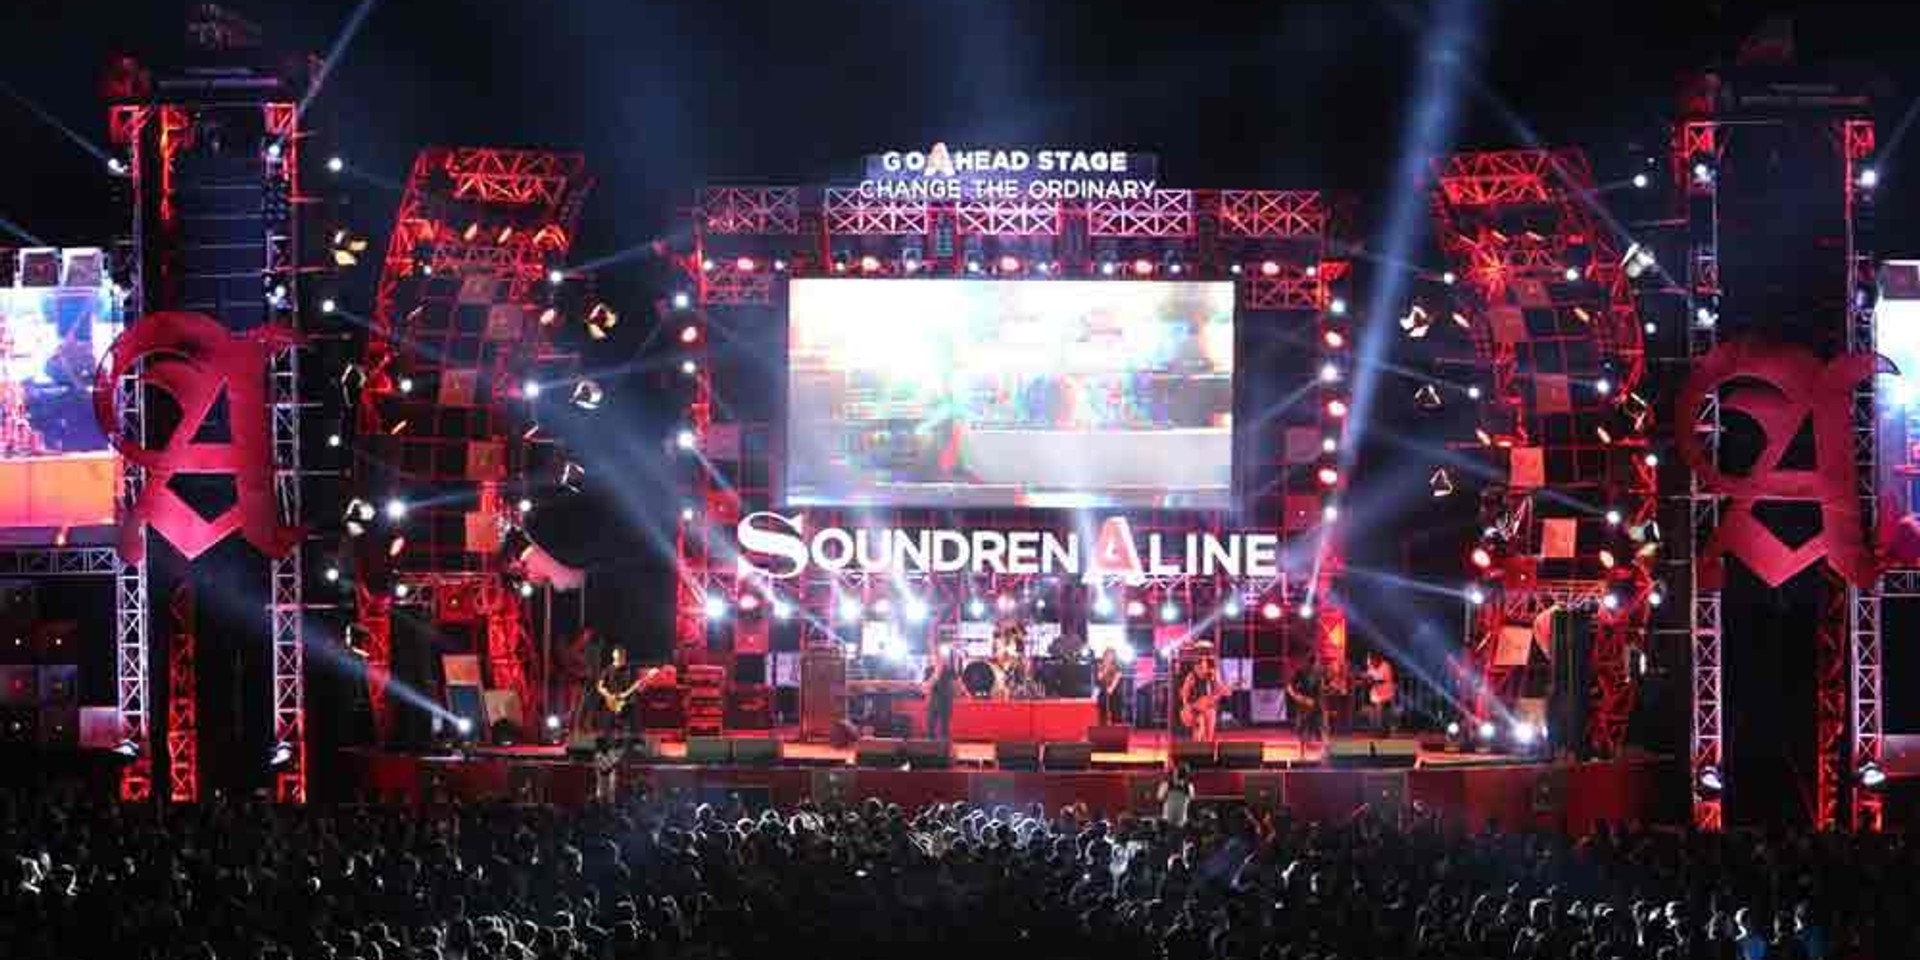 Indonesian music festival Soundrenaline returns this year with JET, Burgerkill, KPR and more